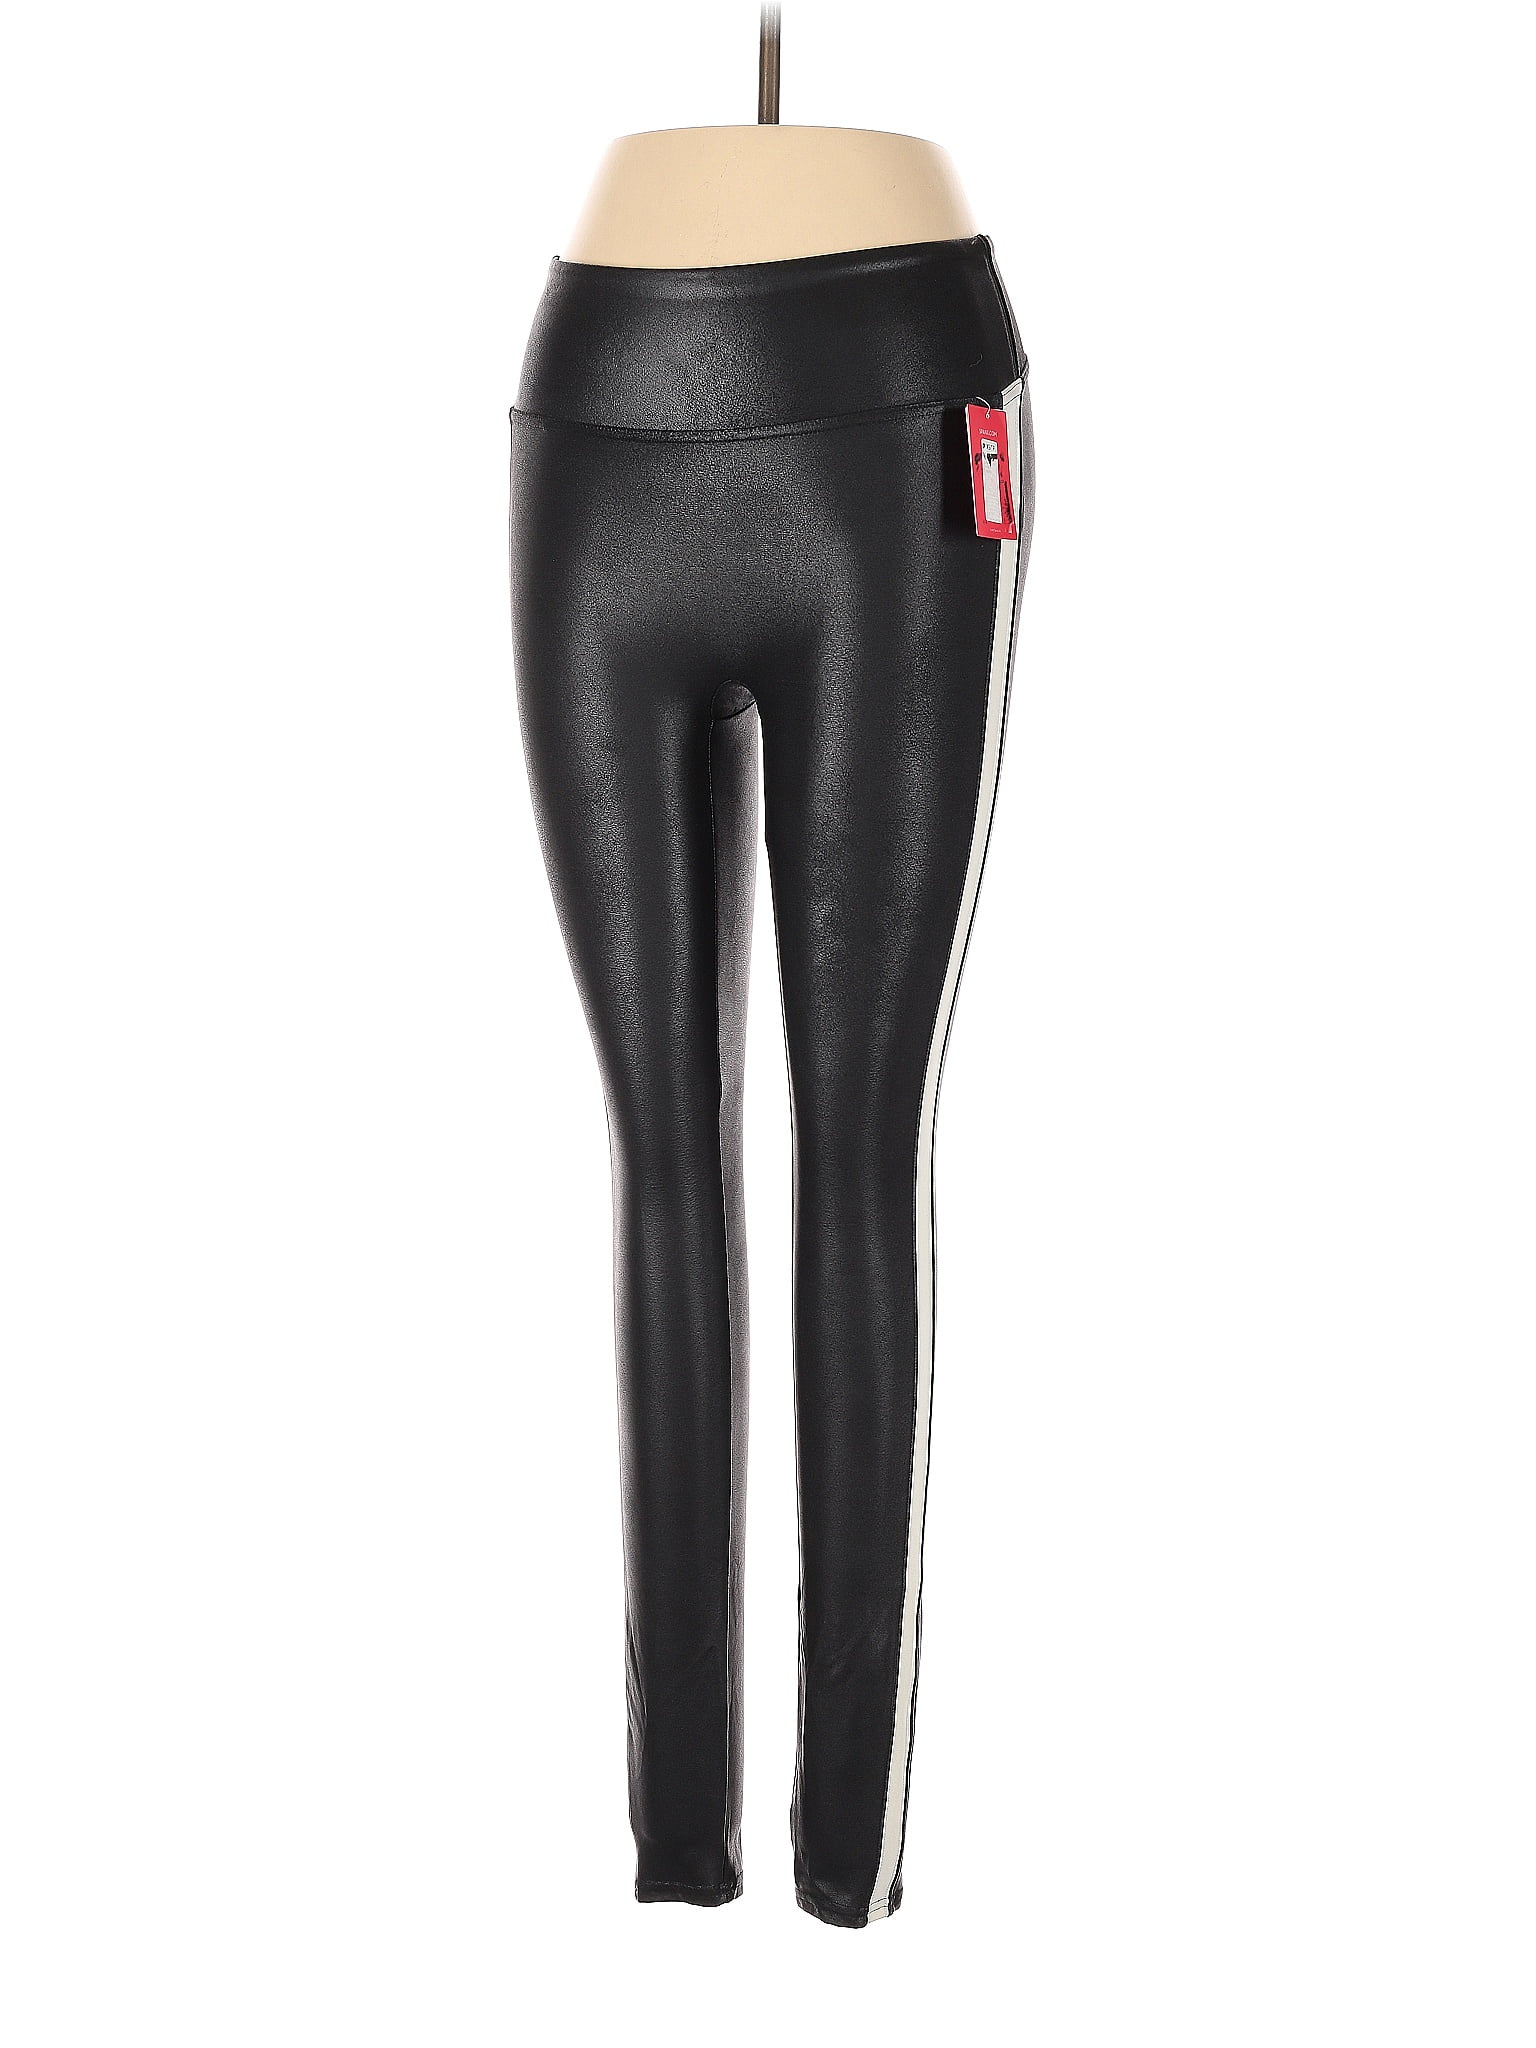 SPANX Solid Black Leggings Size XS - 62% off